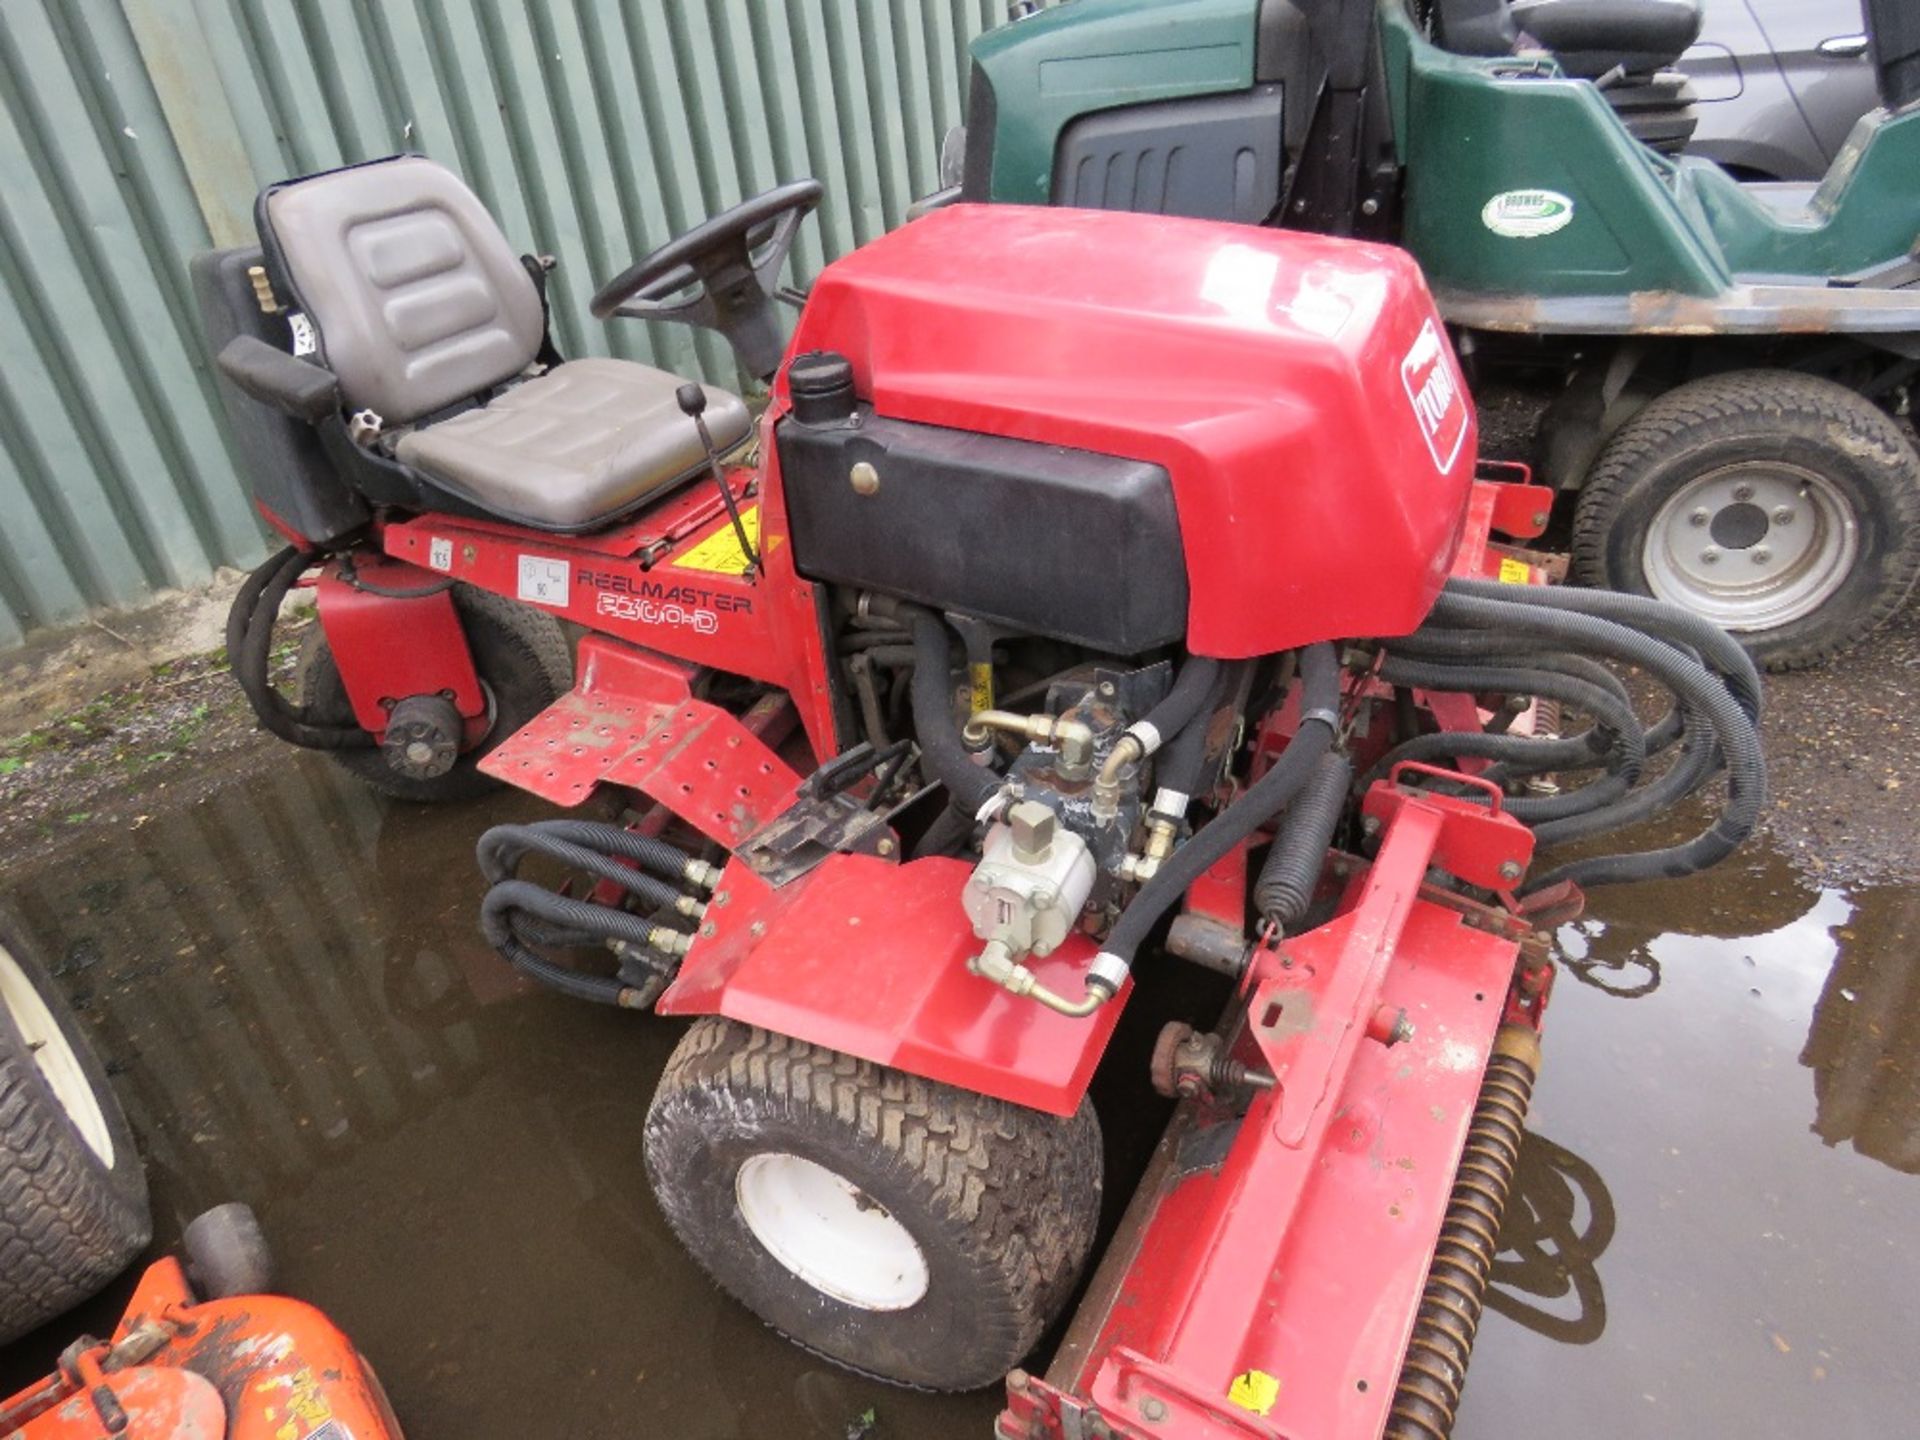 TORO REELMASTER 2300D 3218 REC HRS. TRIPLE MOWER. WHEN TESTED WAS SEEN TO DRIVE, STEER AND BLADES TU - Image 3 of 5